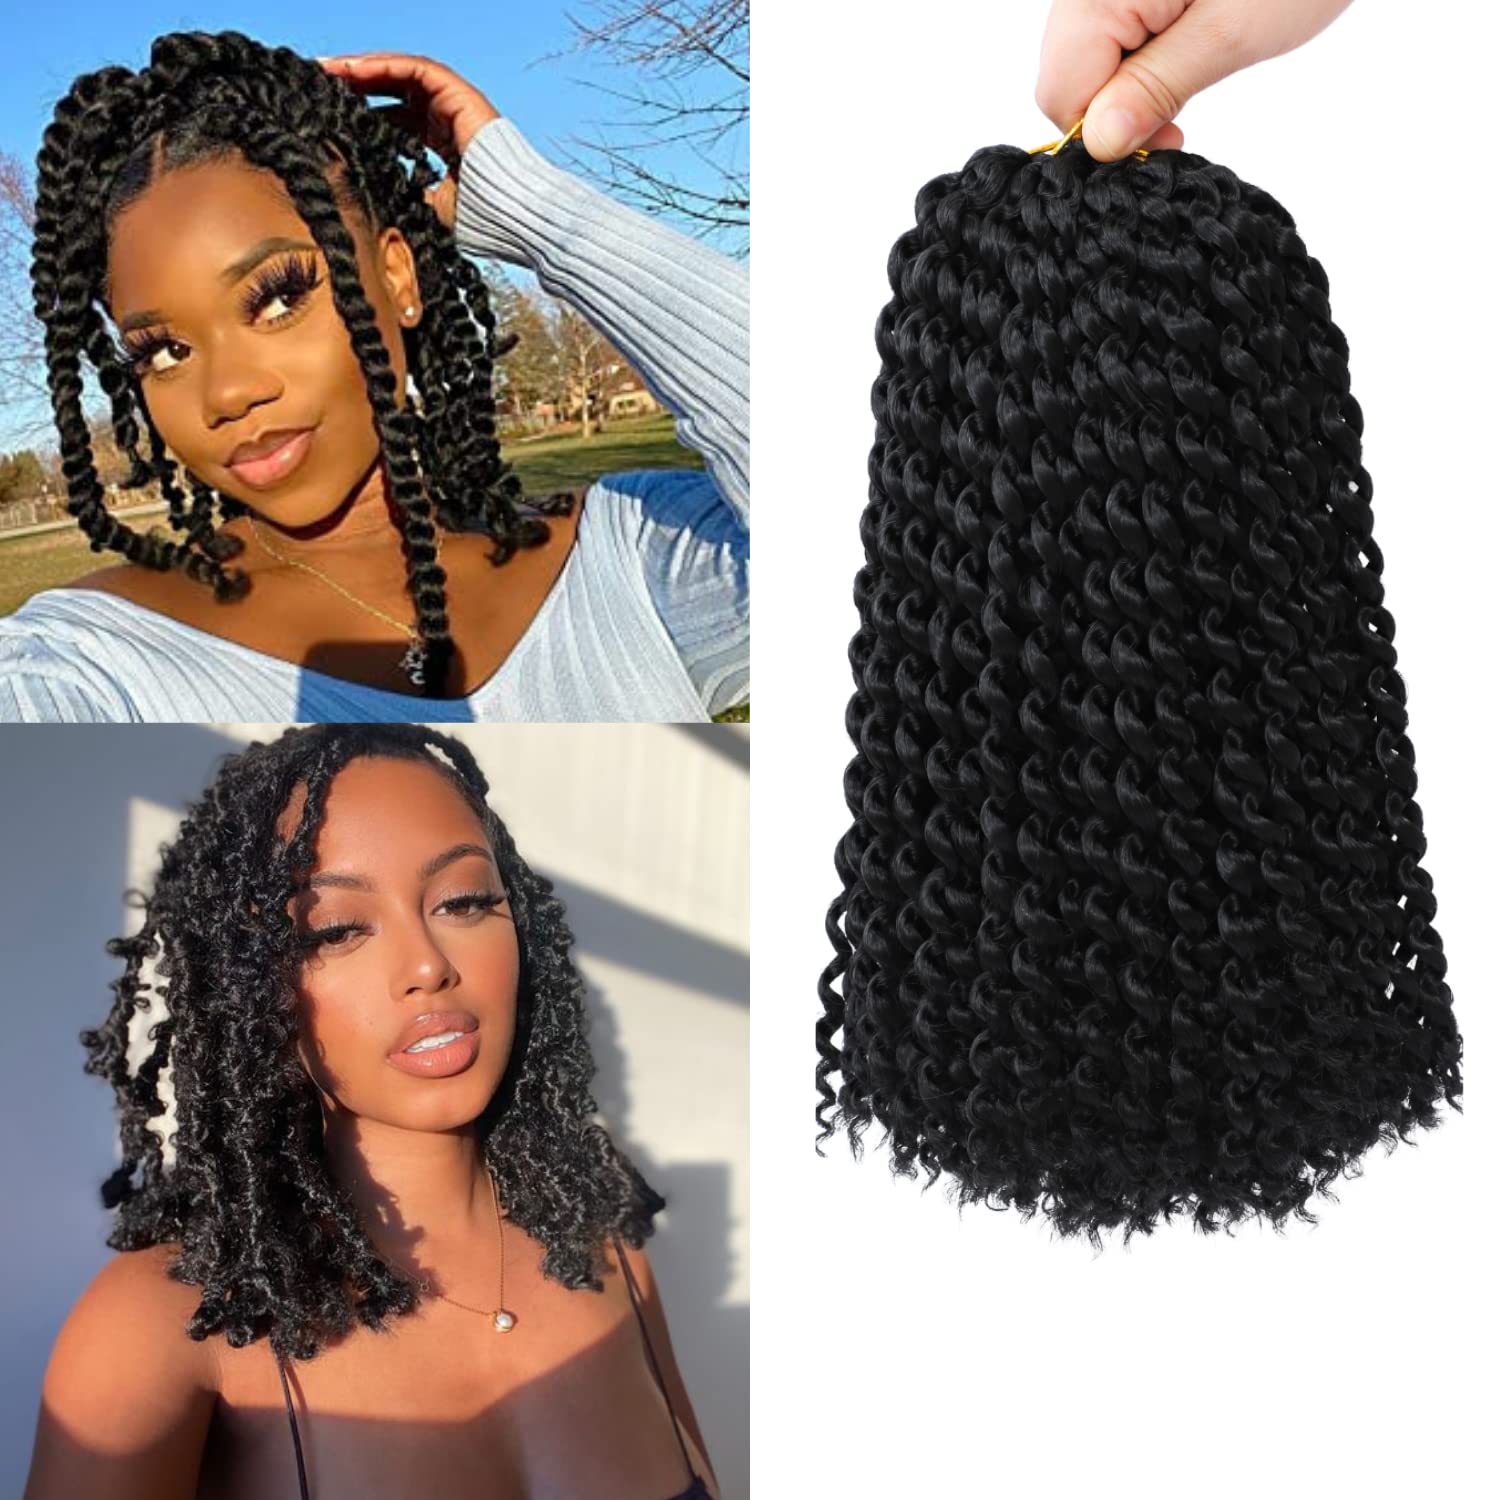 Passion Twist Hair 10 Inch- 8 Packs Passion Twist Crochet Hair Water Wave  Crochet Hair for